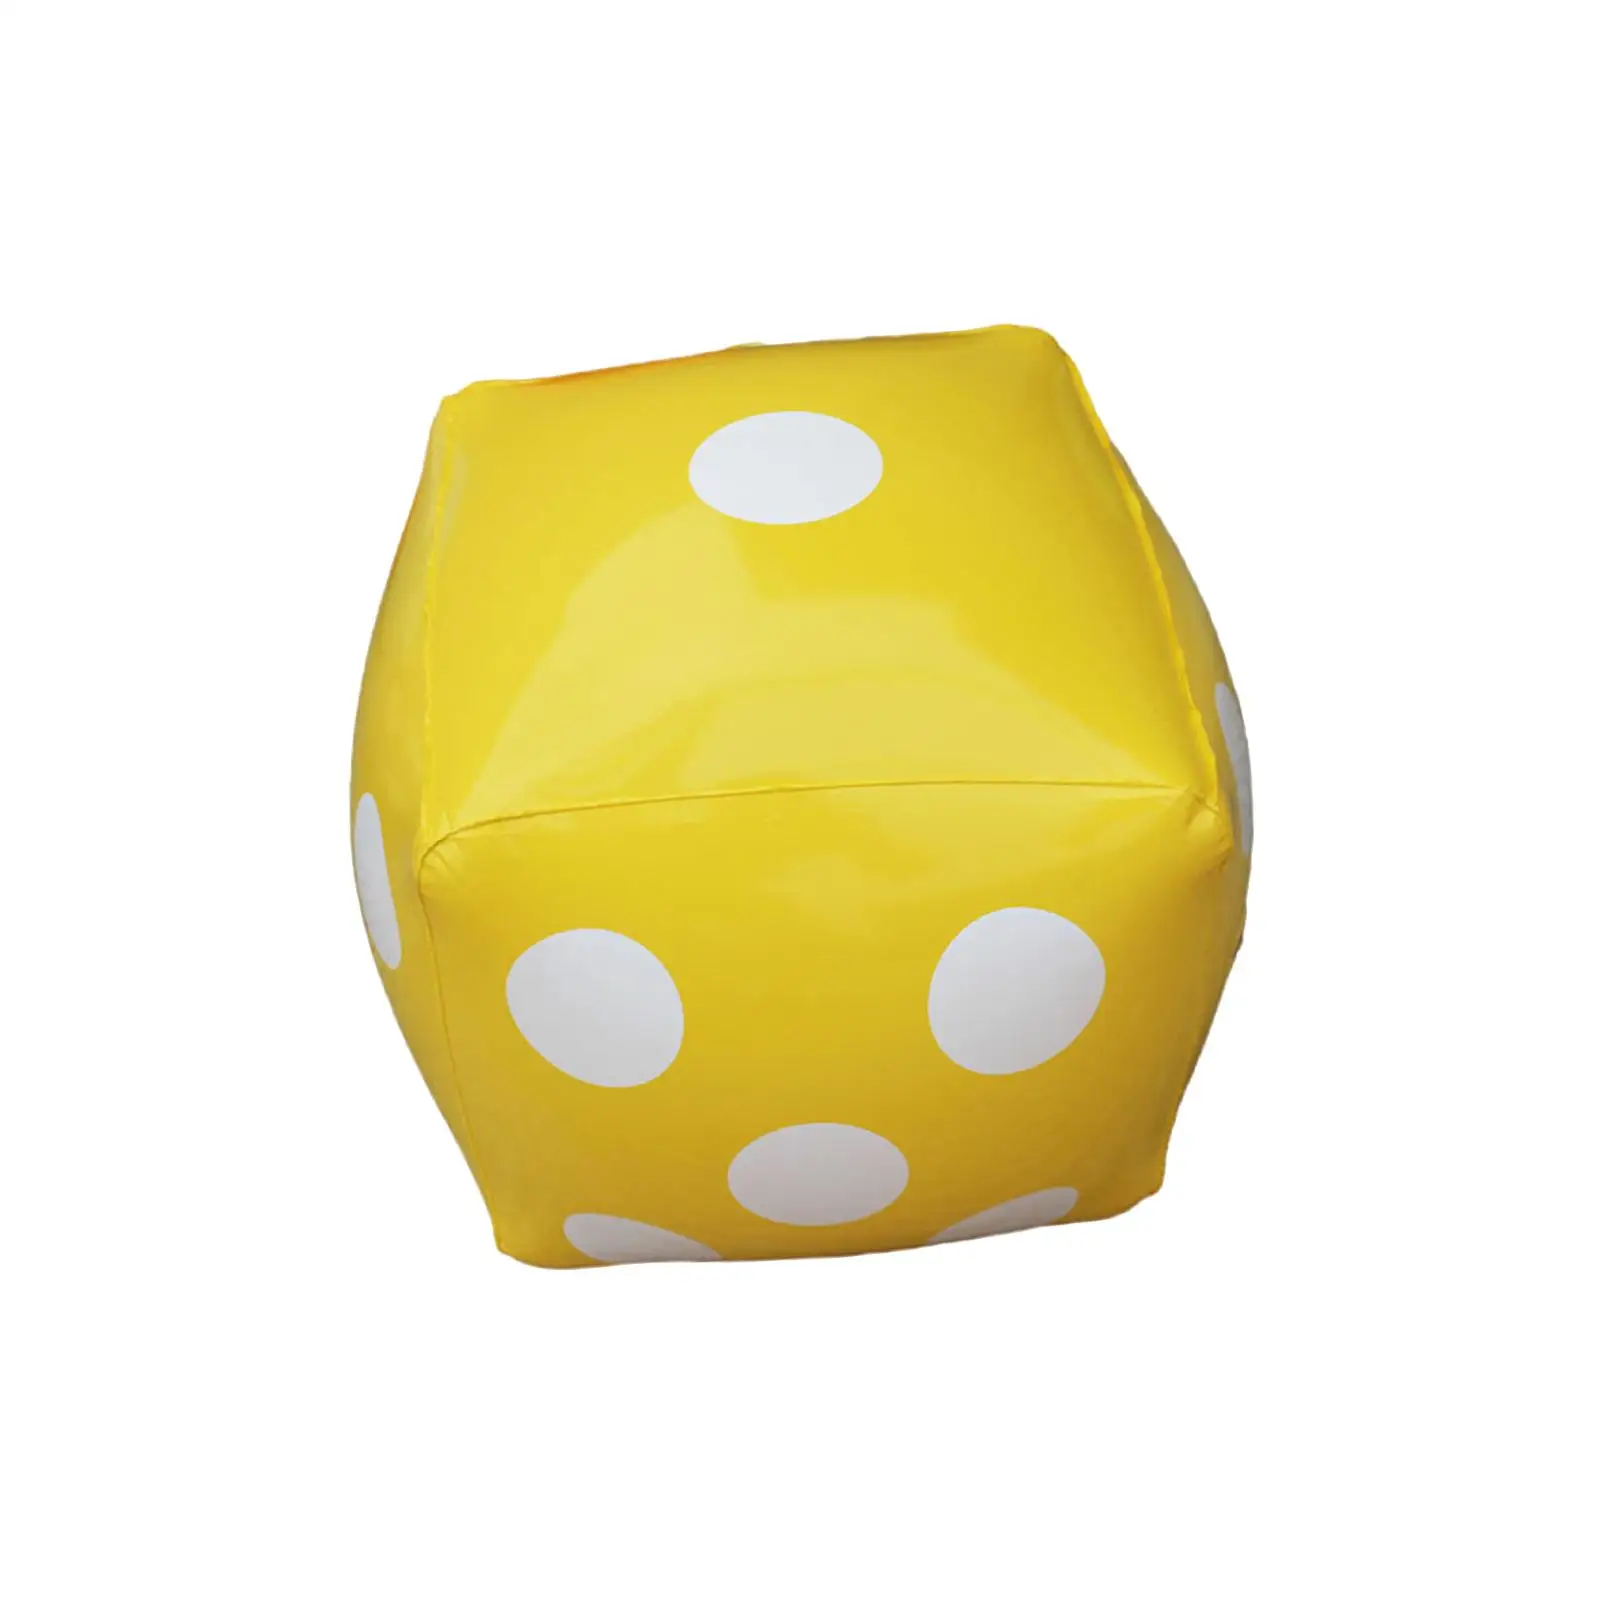 Inflate Dice Funny Swimming Flotation 60cm Swimming Pool Dices for Kids Toys Stage Props Backyard Party Favors Children Adult